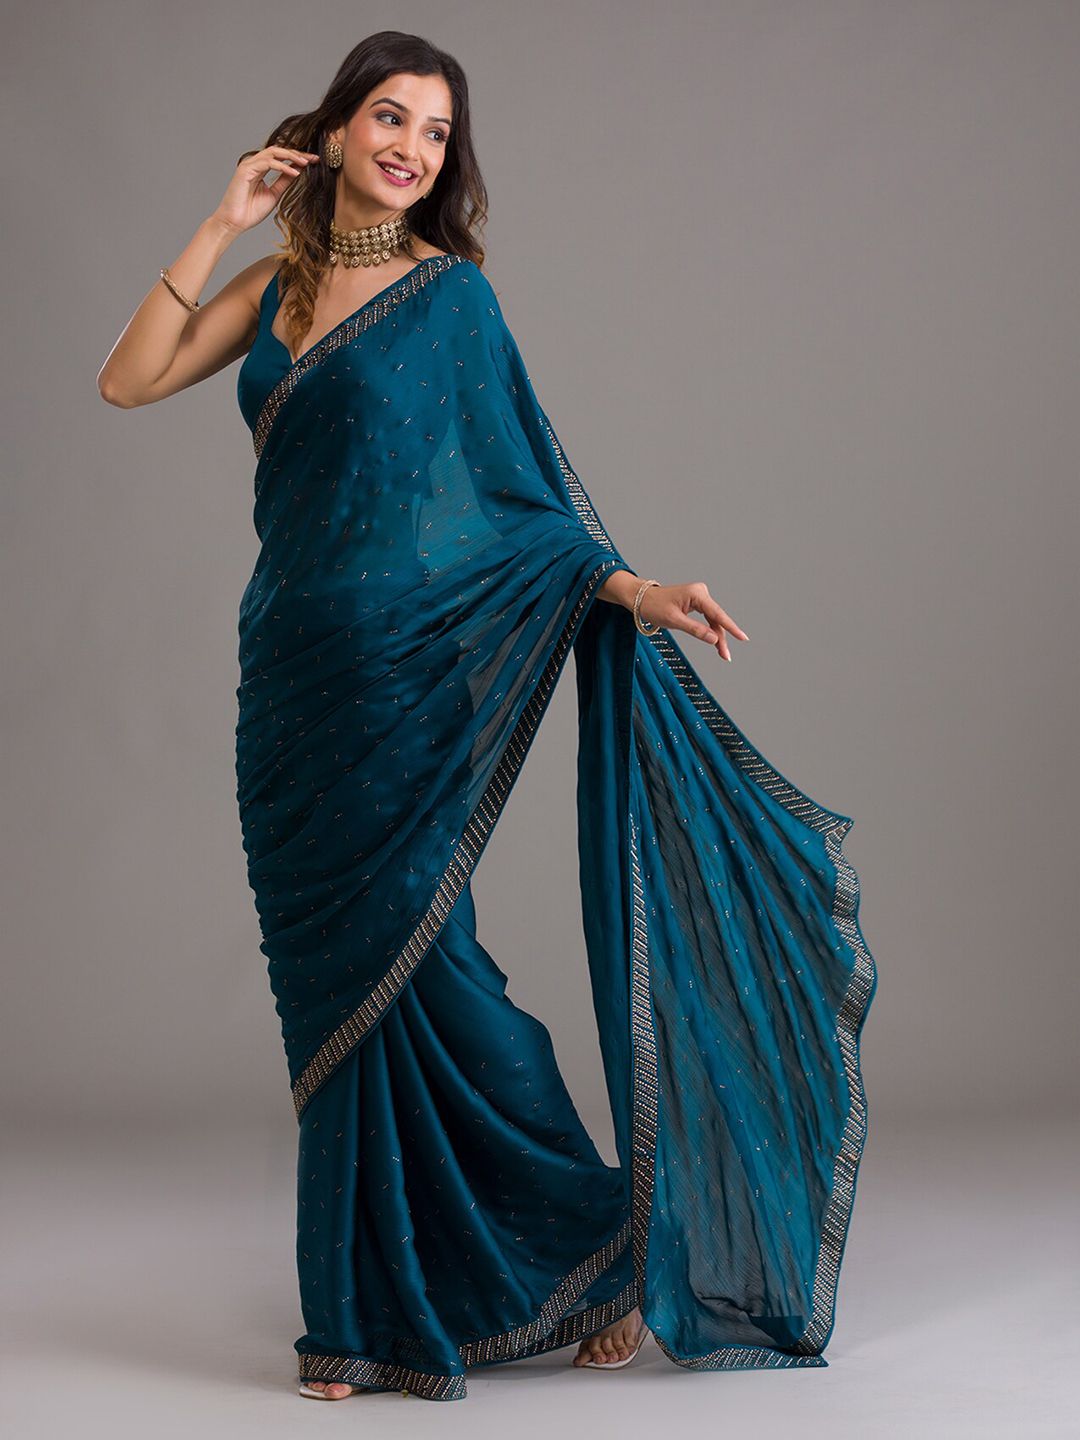 Koskii Blue & Gold-Toned Embellished Beads and Stones Saree Price in India